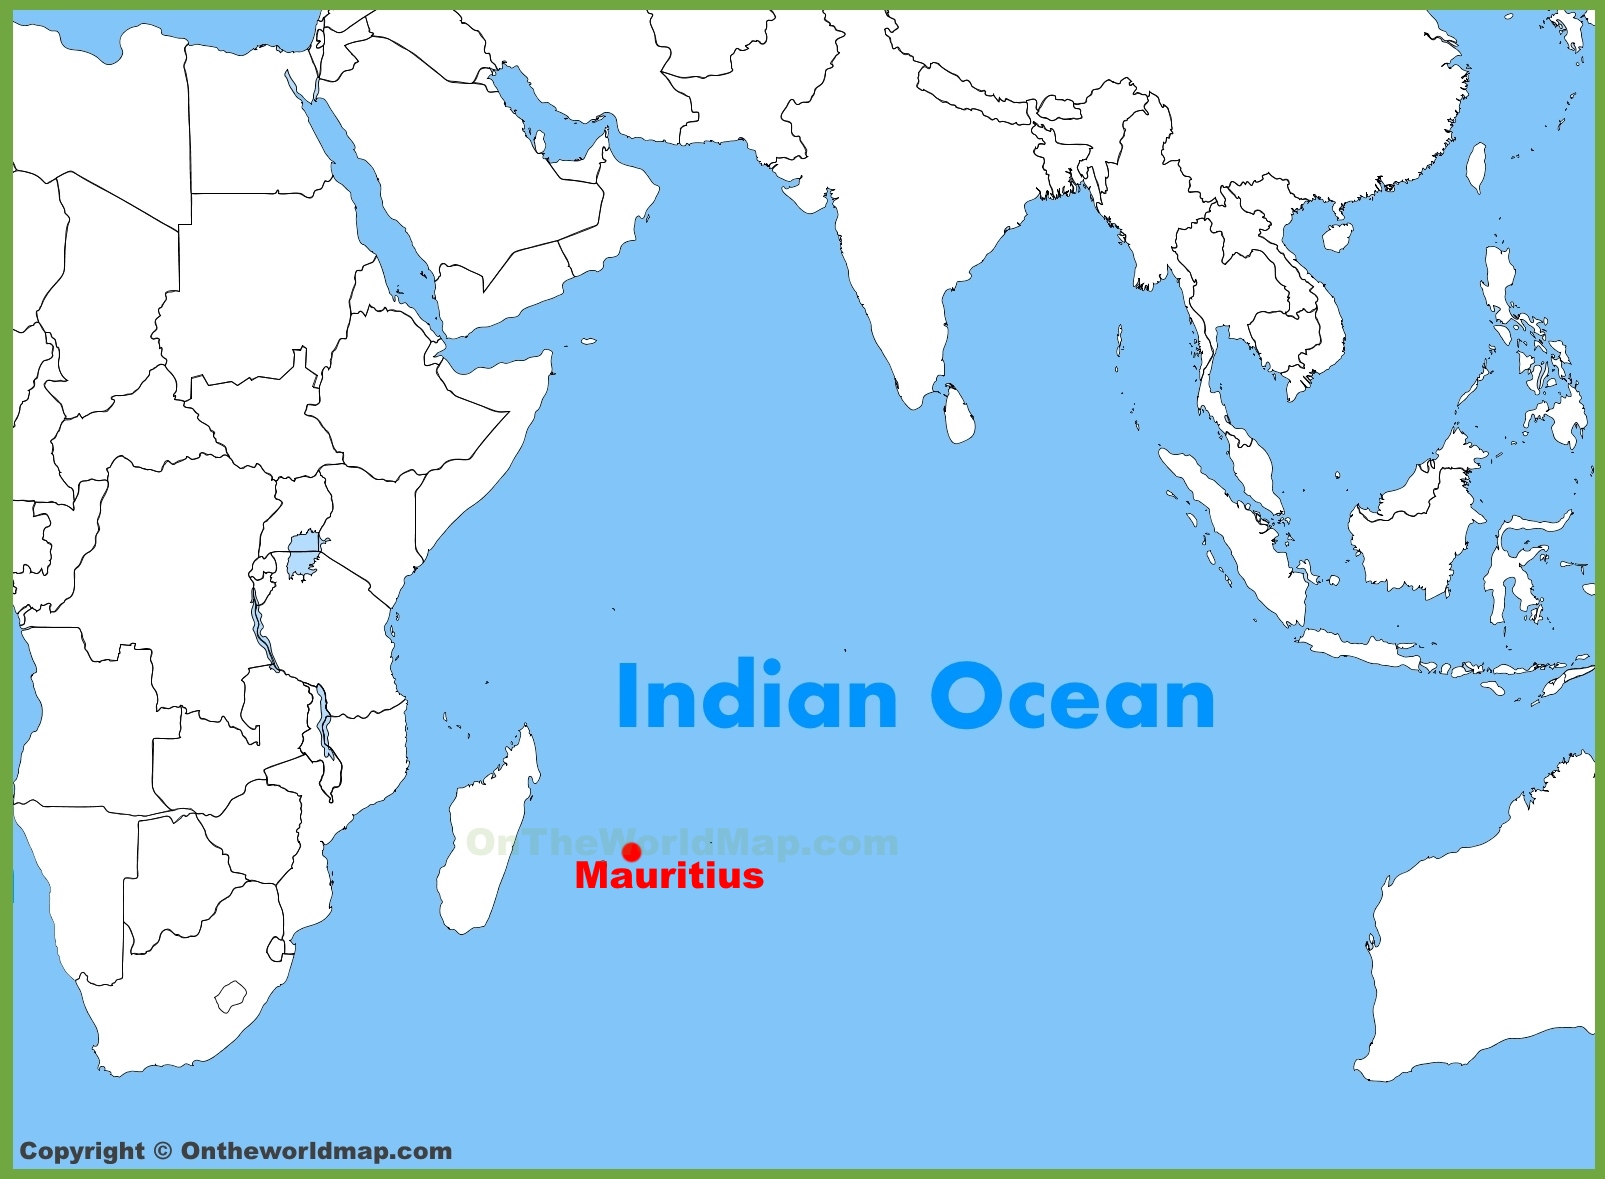 Mauritius Location On The Indian Ocean Map